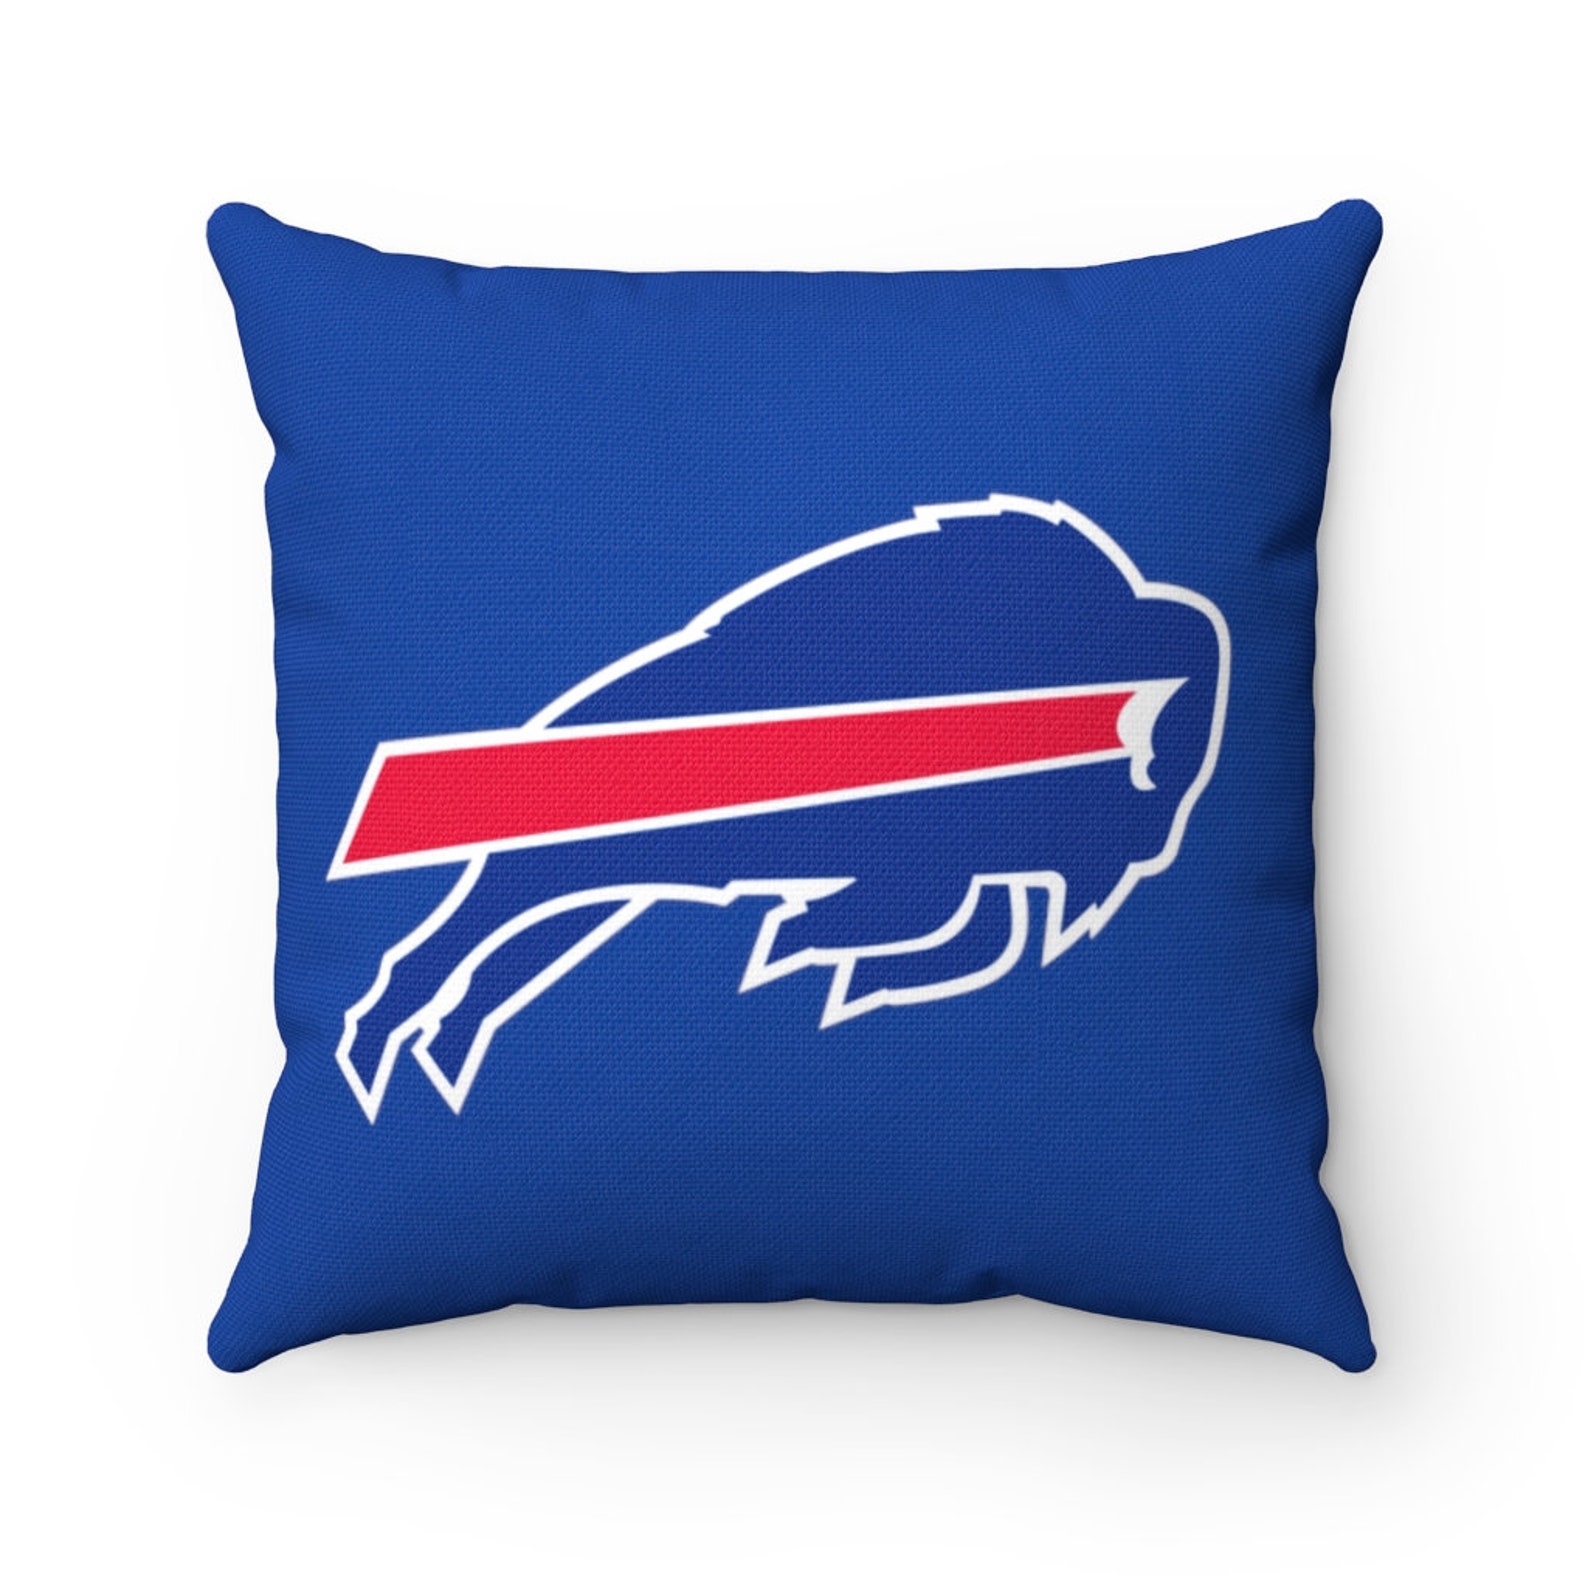 Buffalo Bills Square Pillow These beautiful indoor pillows | Etsy